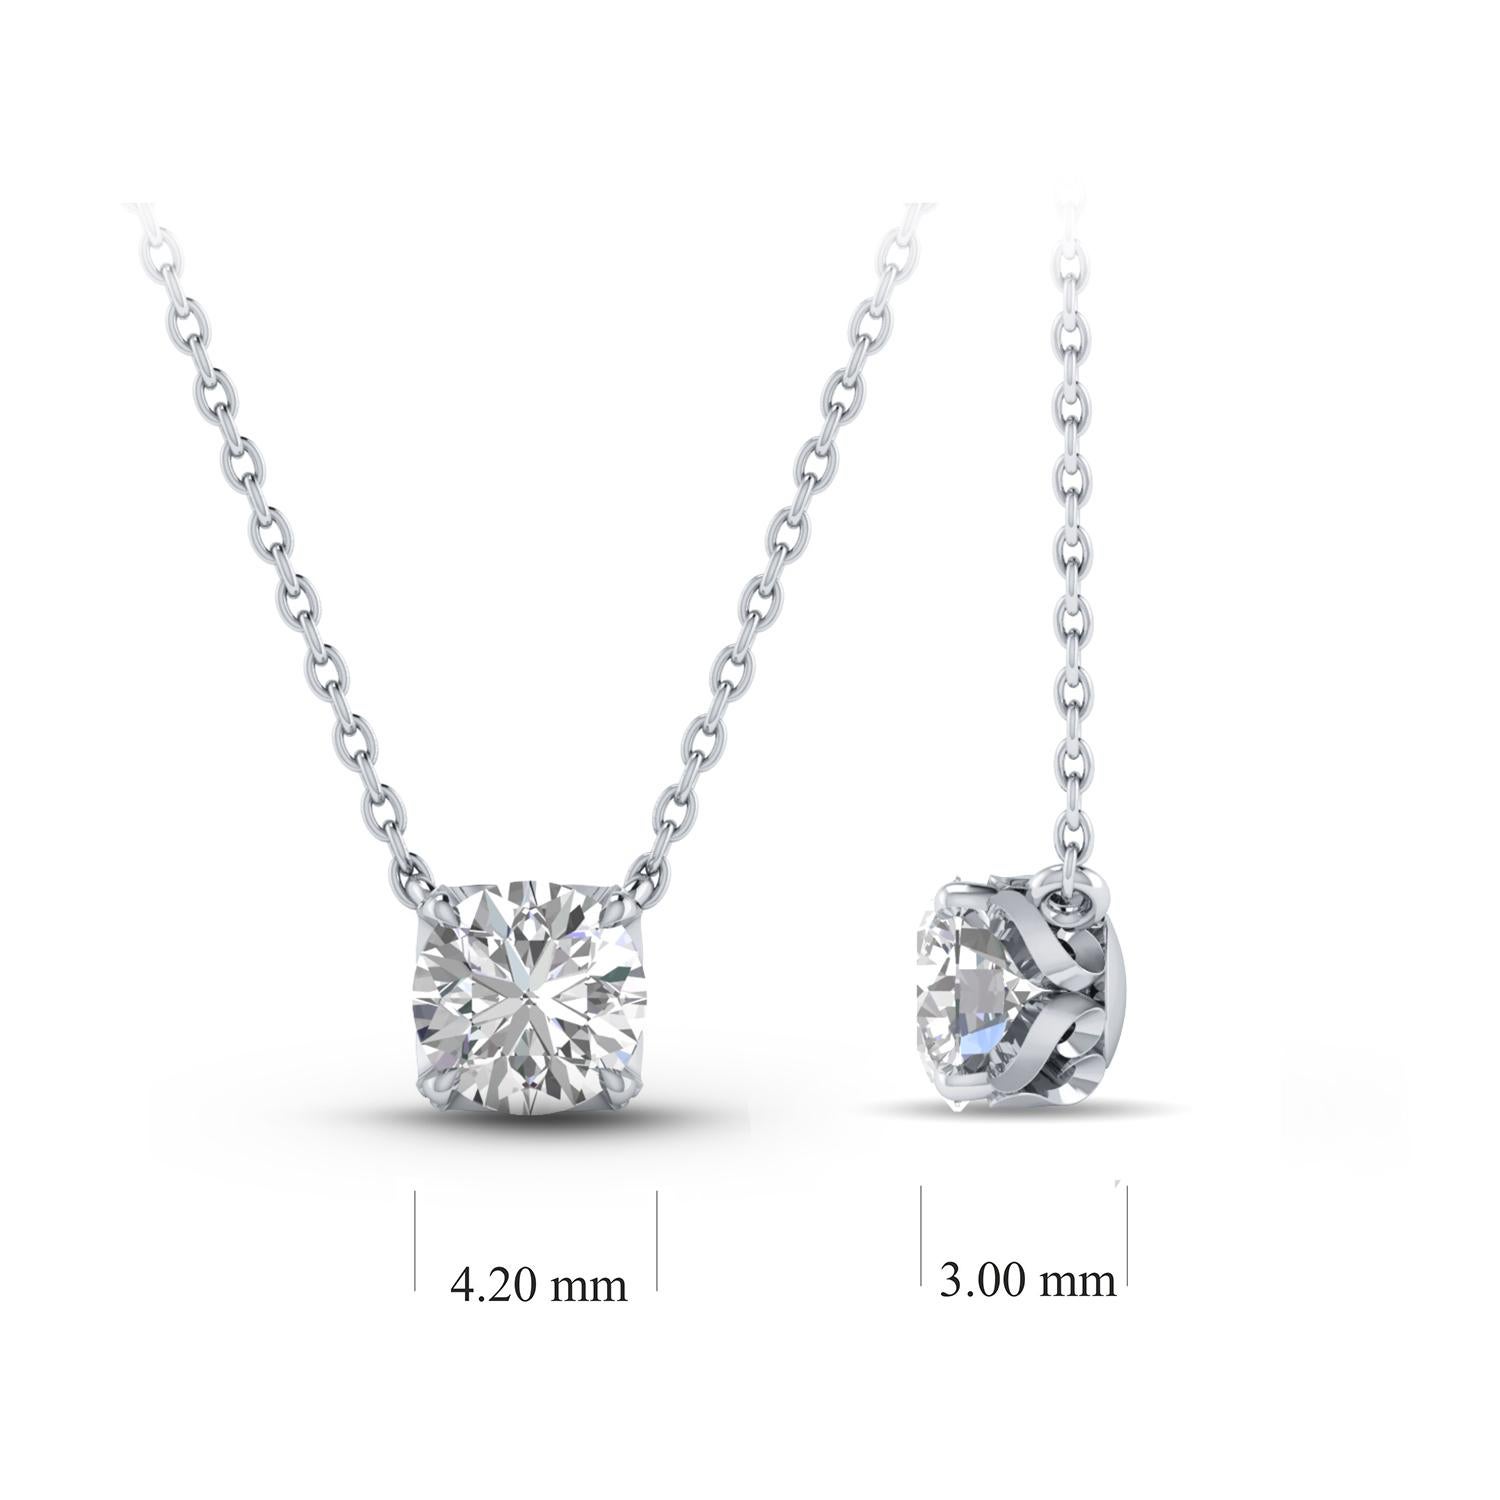  This solitaire diamond necklace features a single, brilliant-cut 0.27 carat diamond in prong setting in 18 KT white gold. This elegant necklace 20-inch cable chain with extender at 18-inch. This classic necklace will be accompanied with a HARAKH